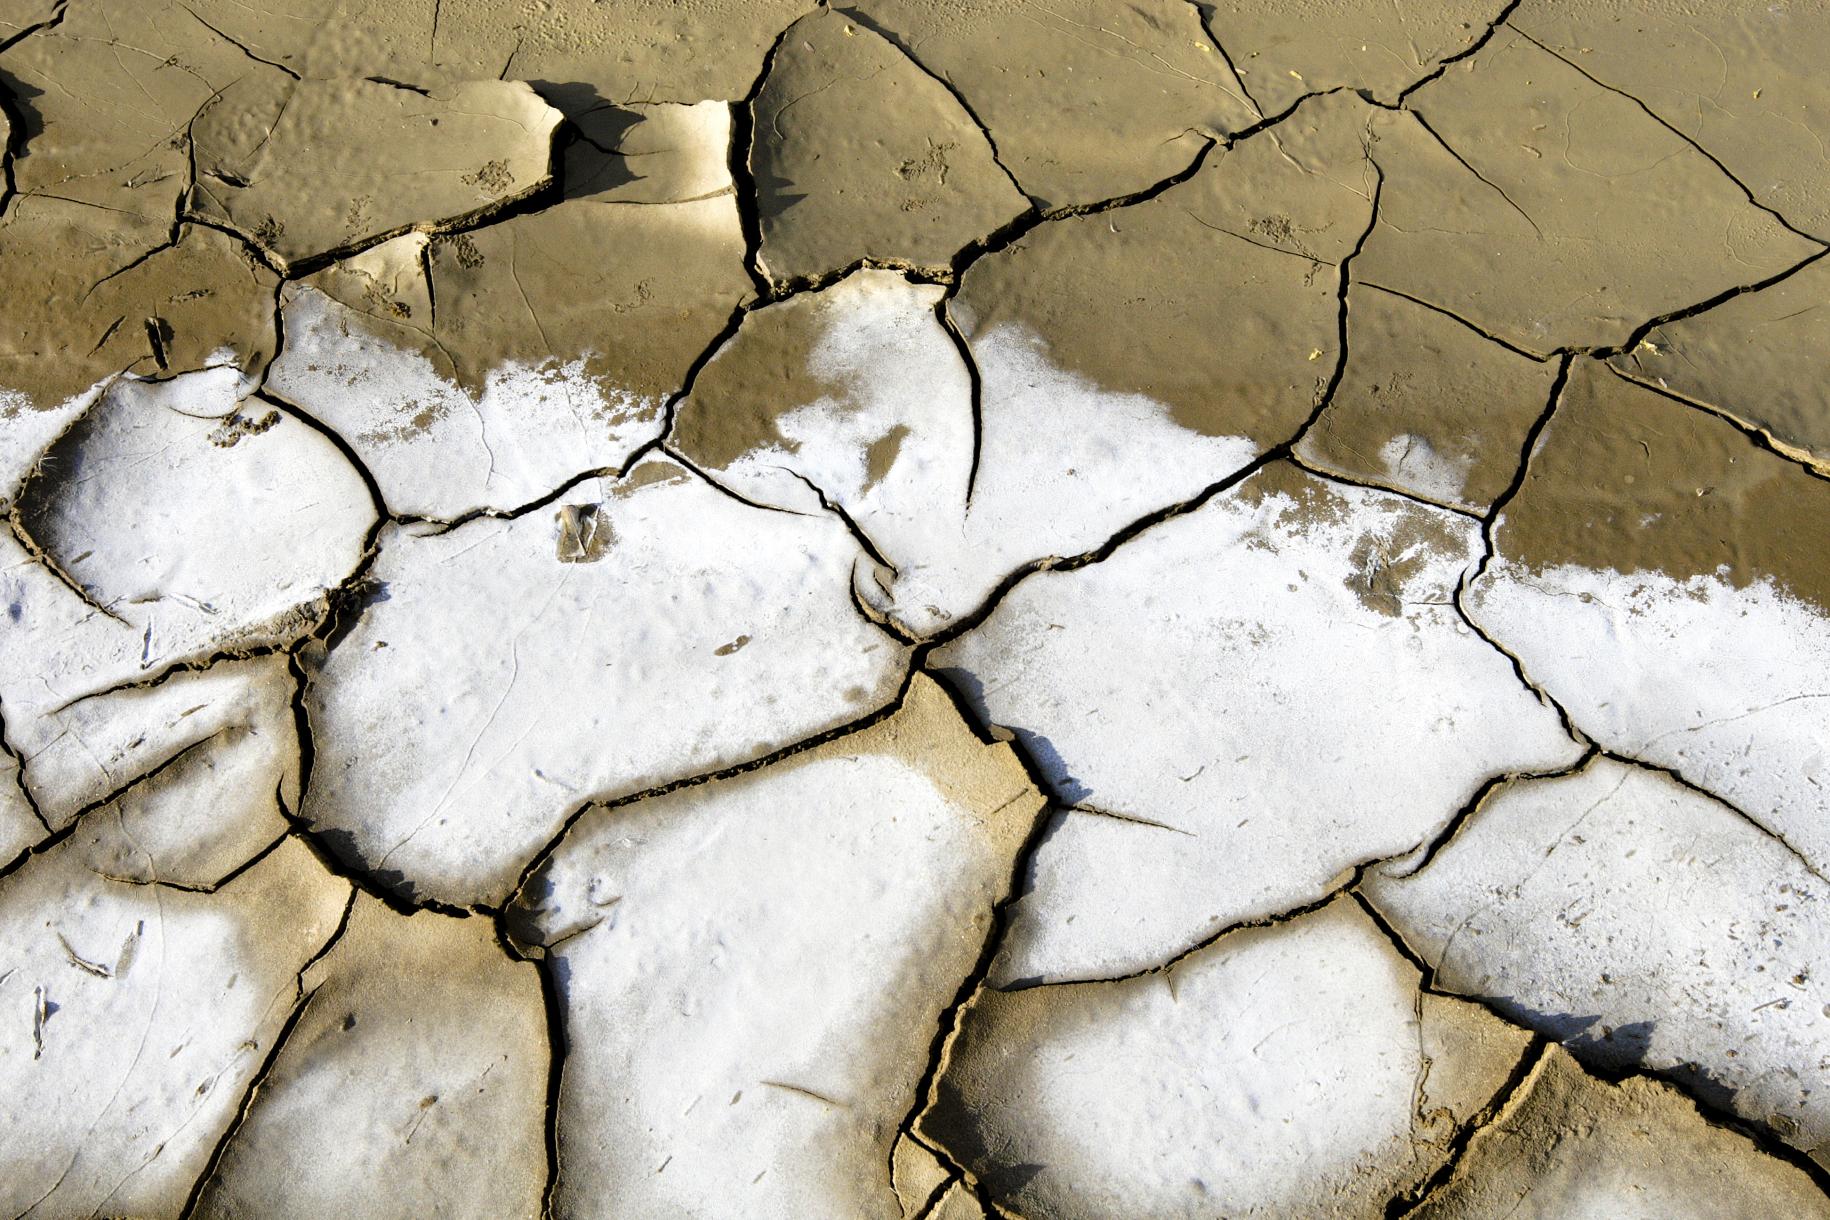 Dry and brittle ground. Image shows the devastation drought and water scarcity can cause the ground. 